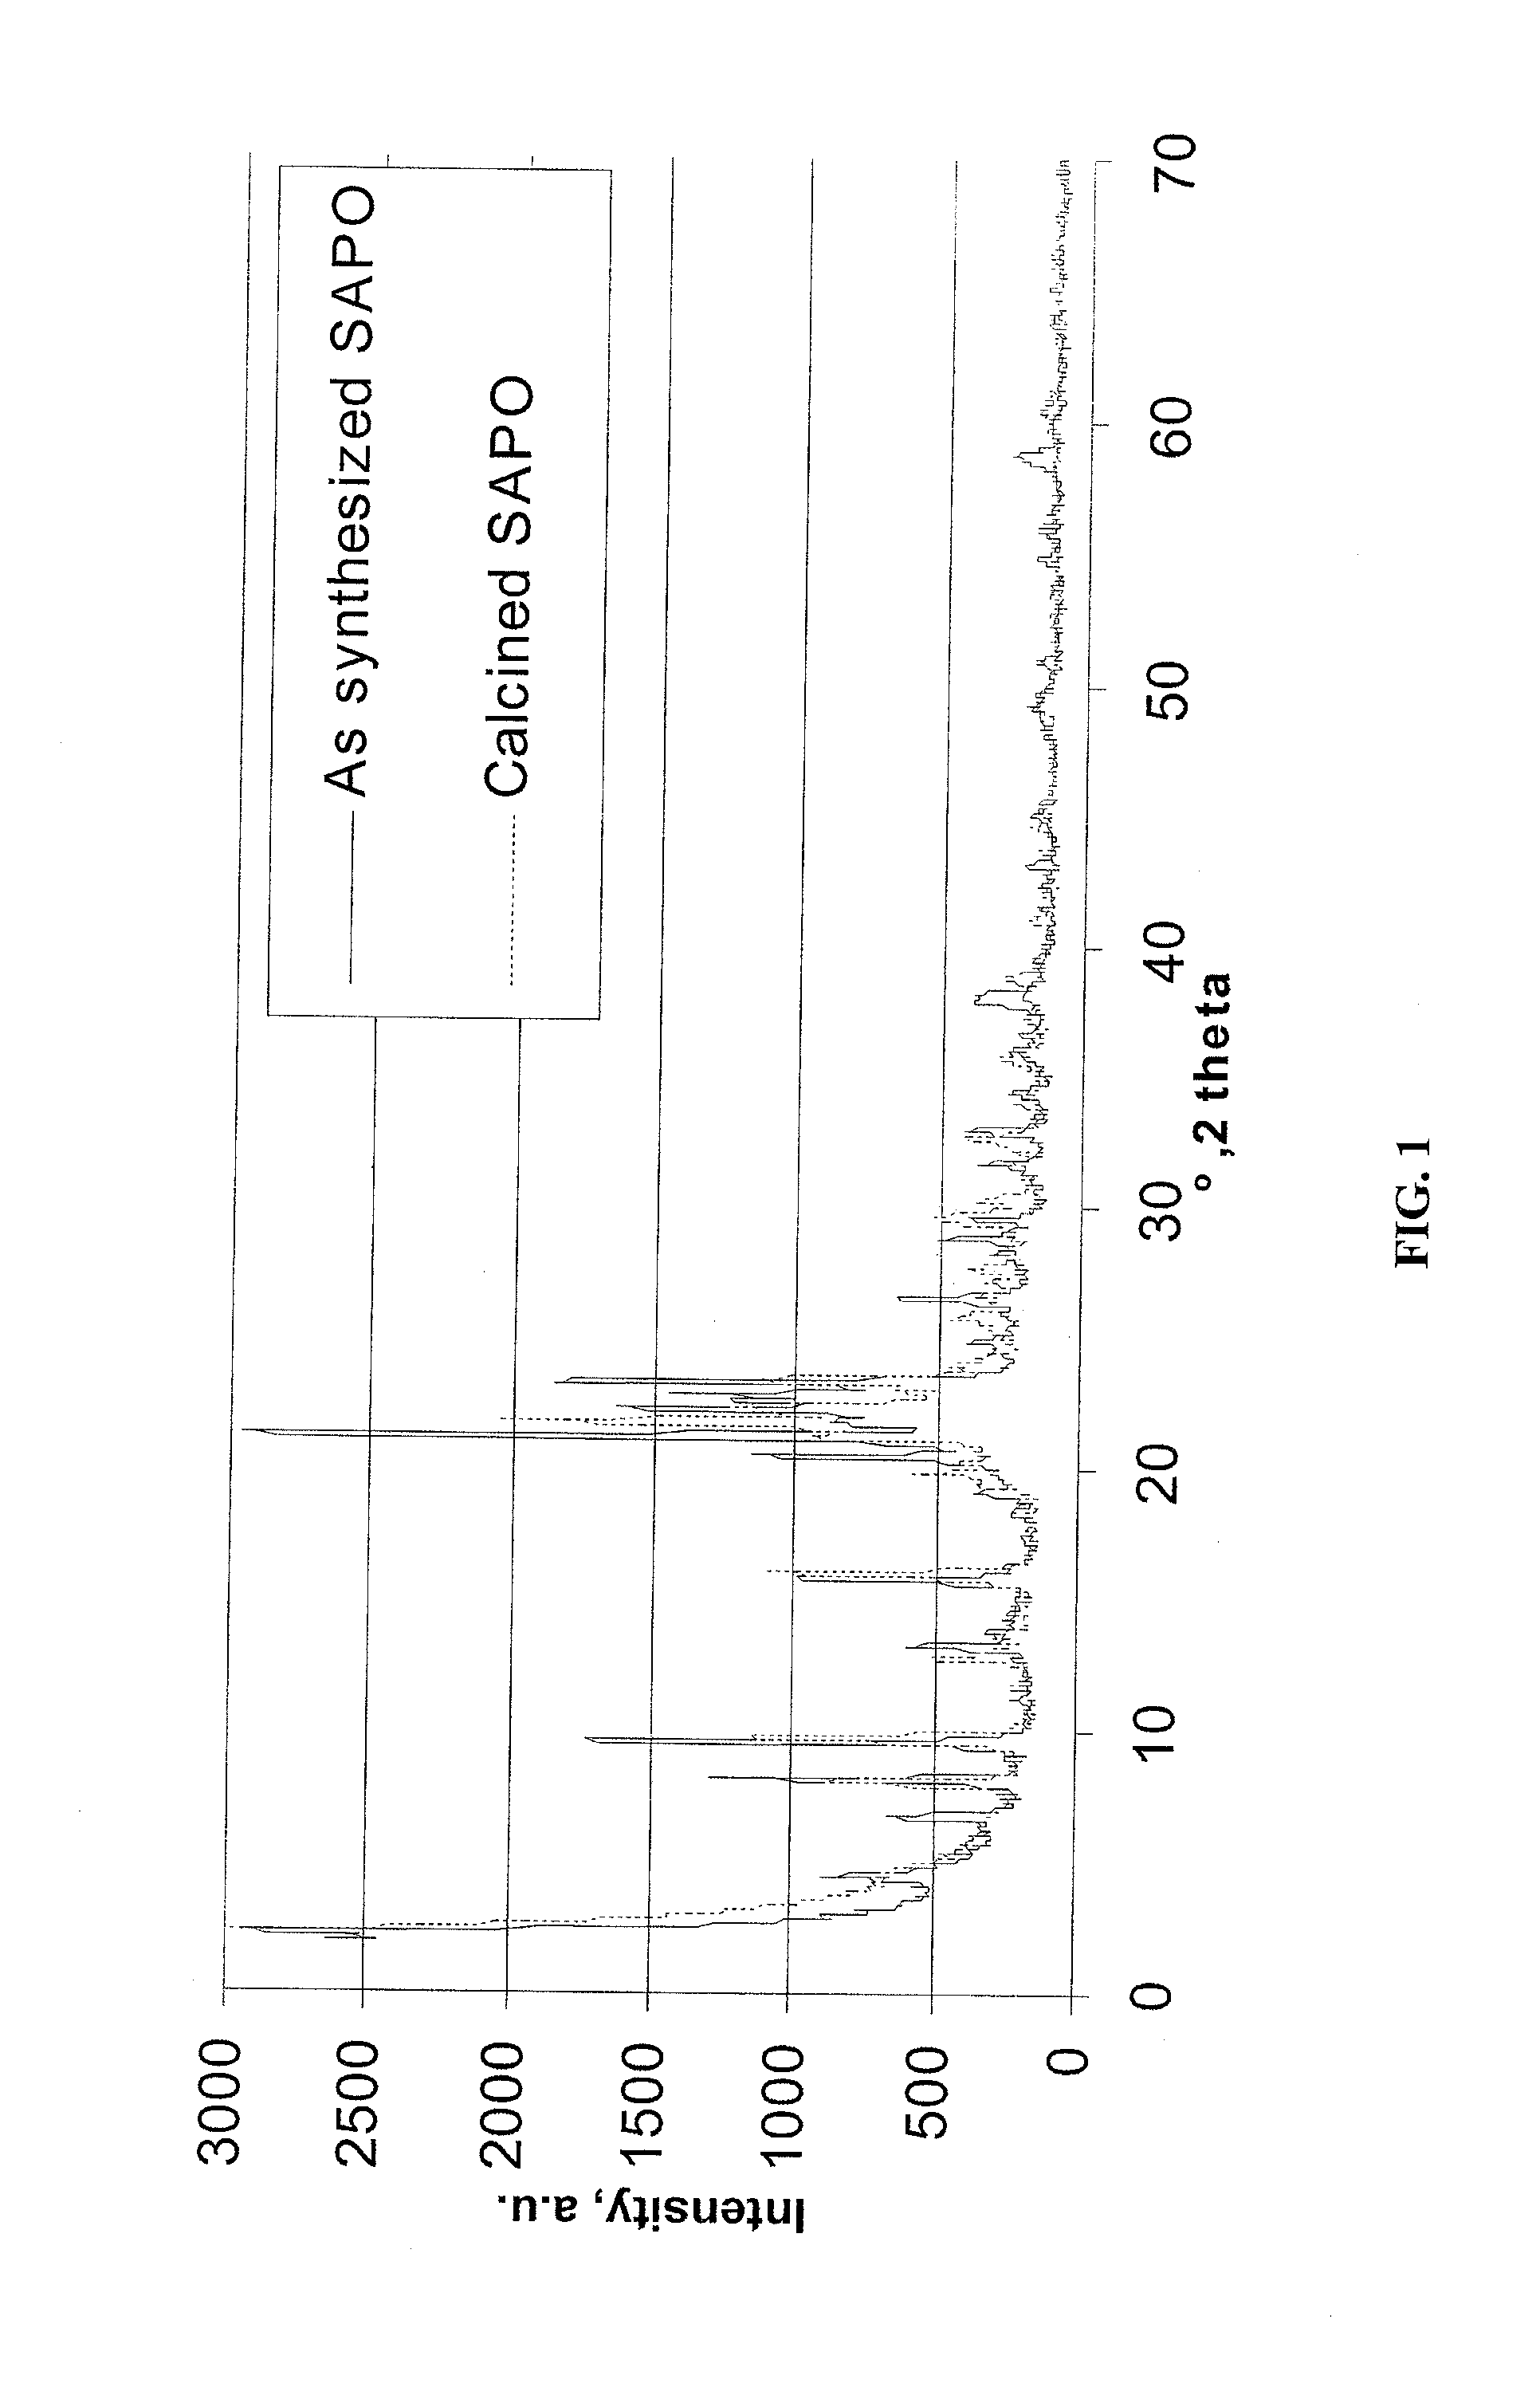 Sapo molecular sieve catalysts and their preparation and uses